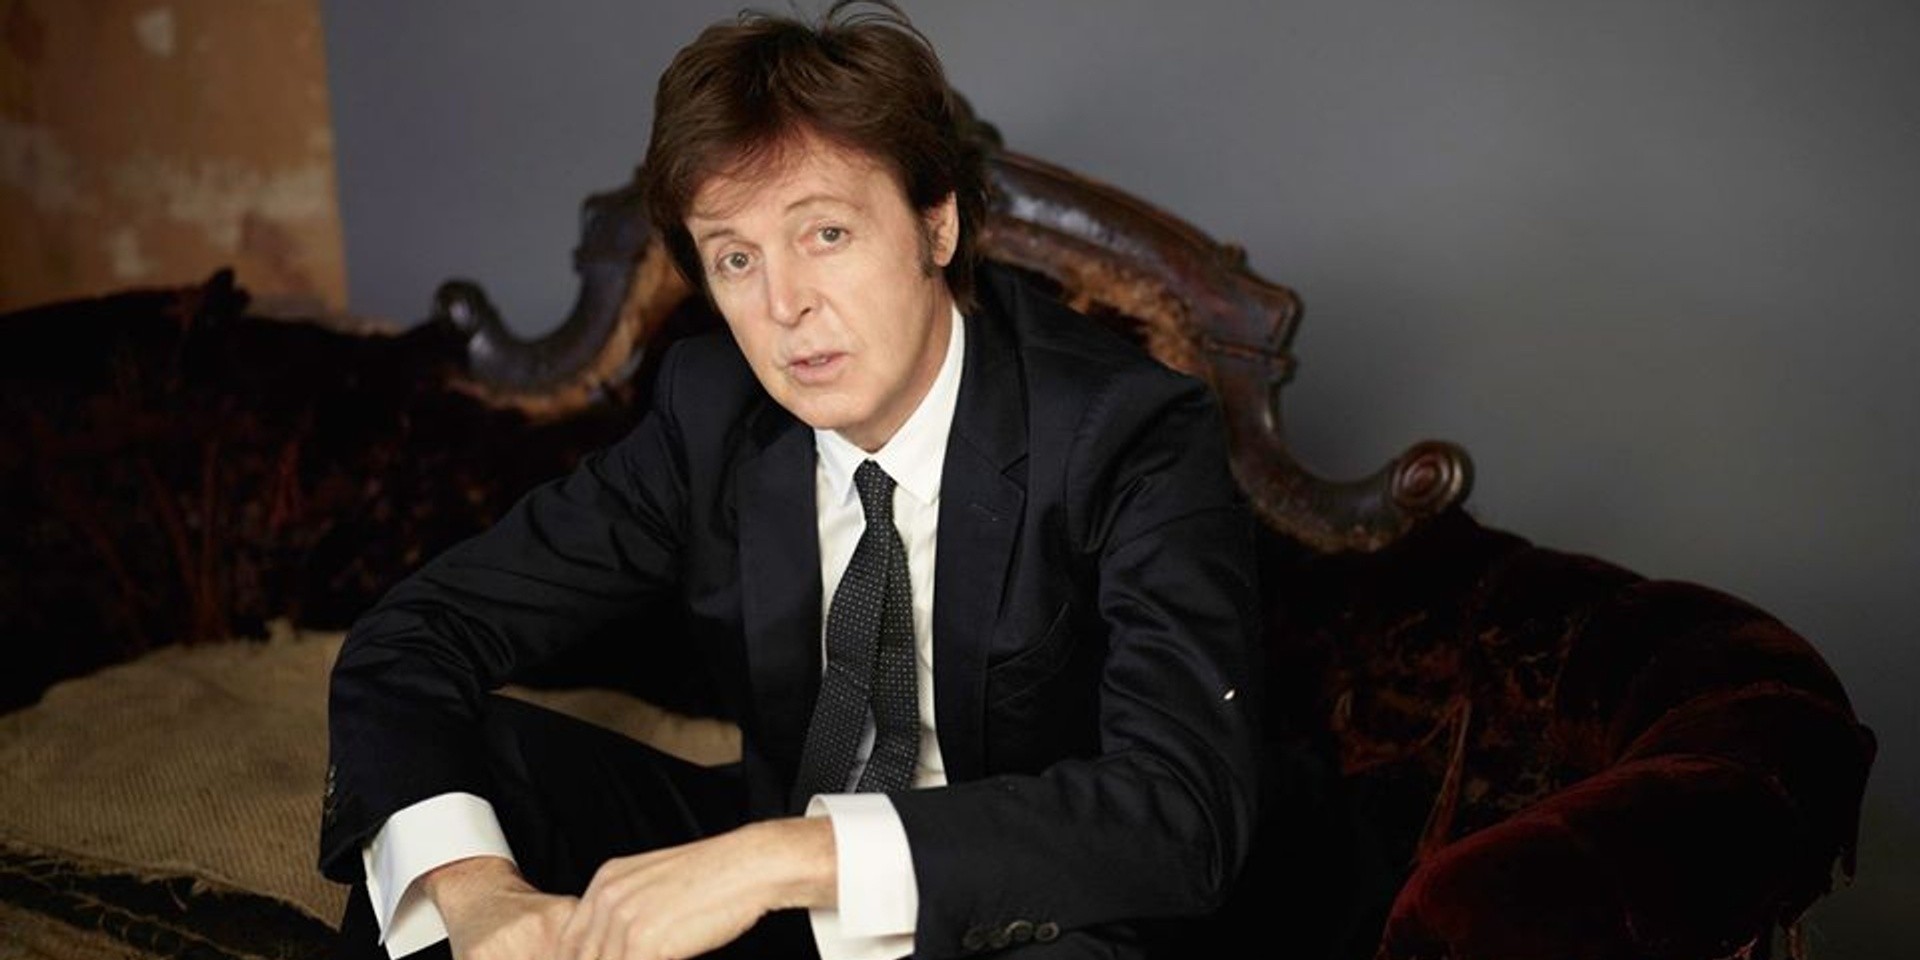 "I think it makes a lot of sense": Paul McCartney on banning wet markets in China 